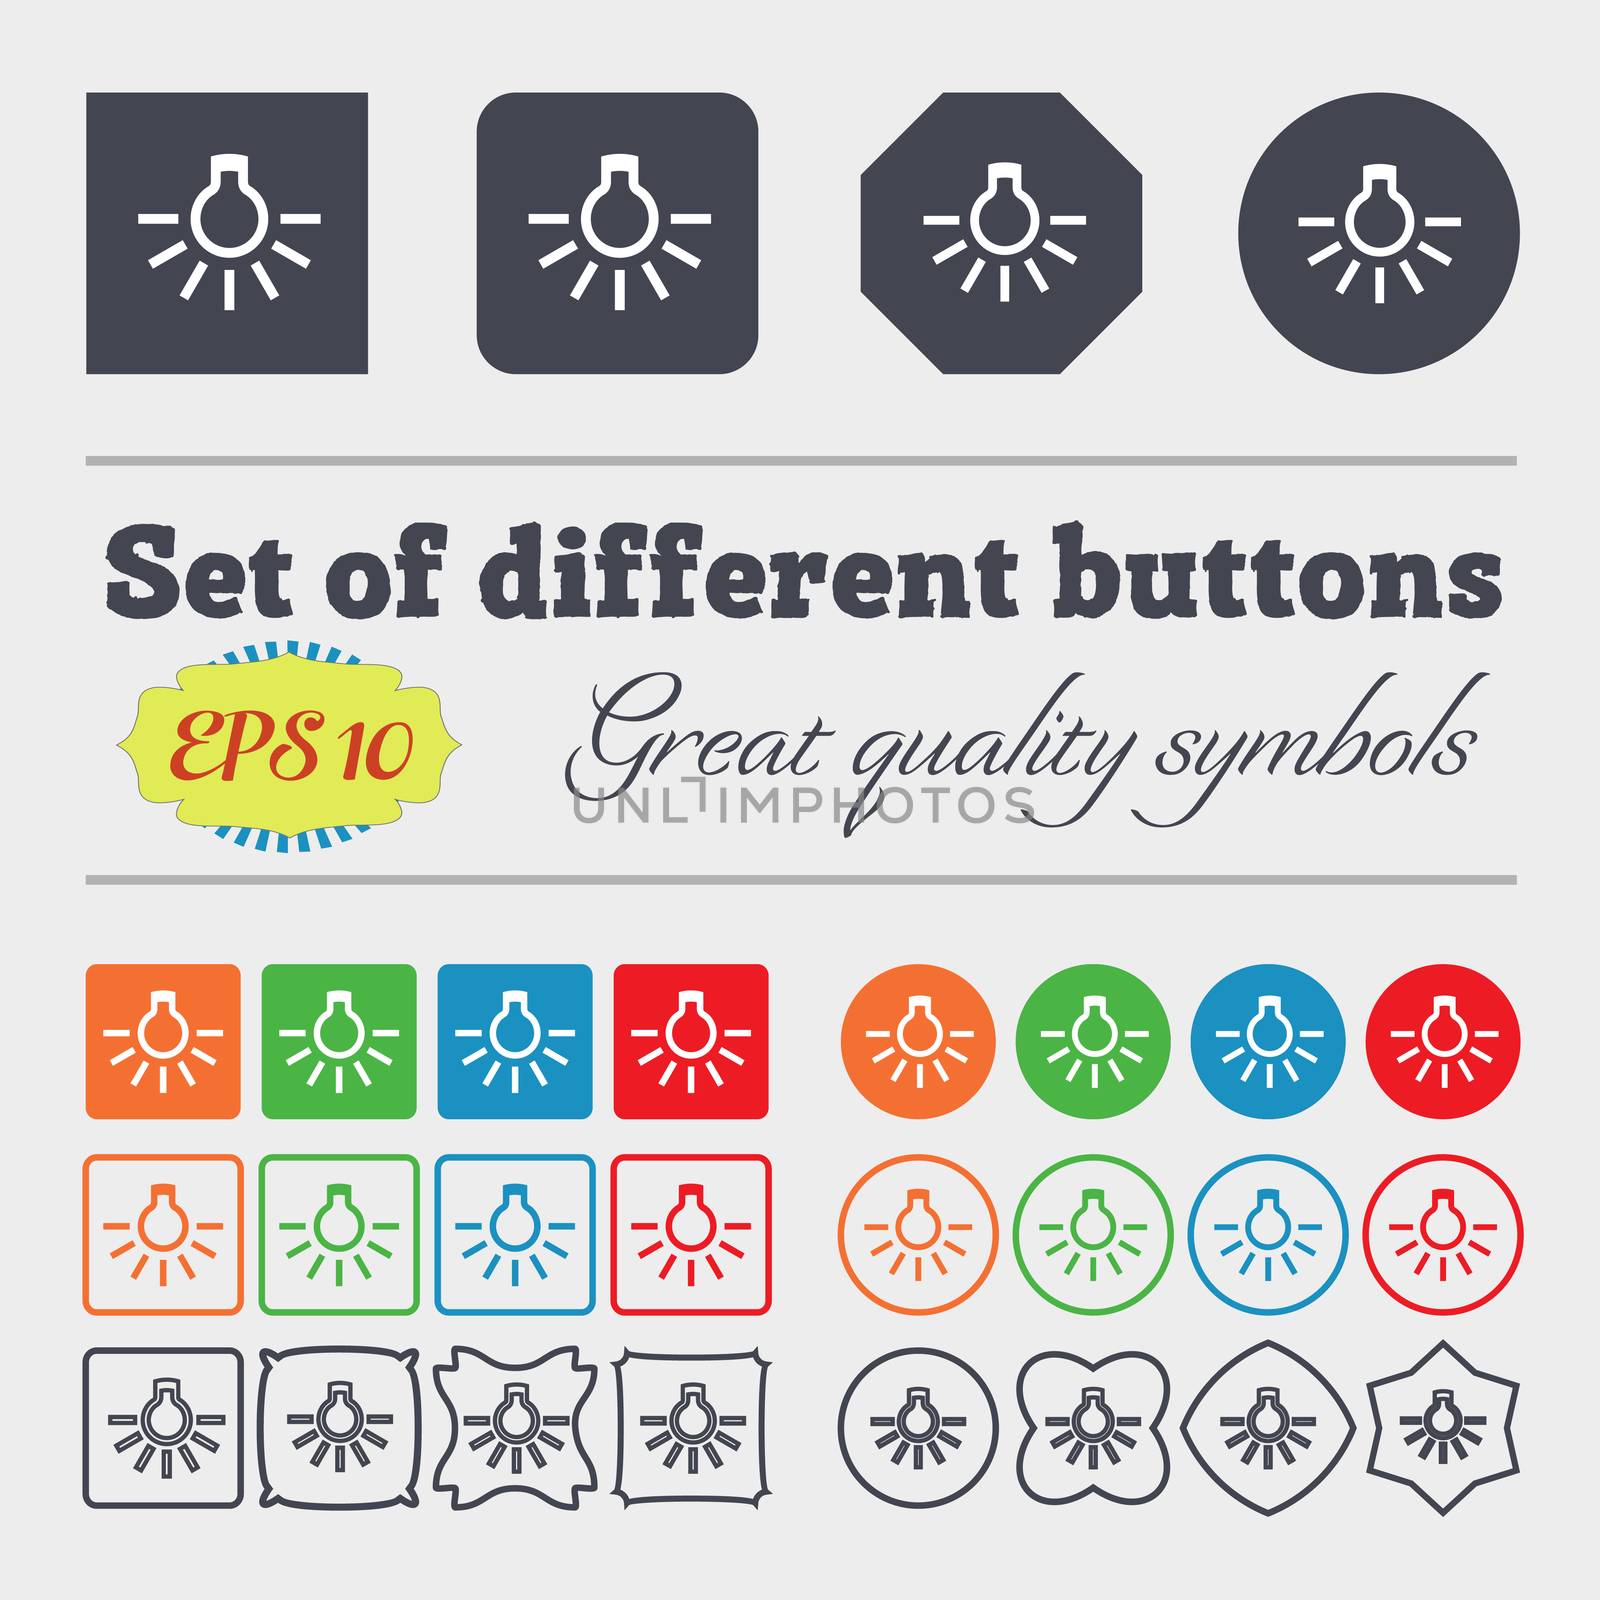 light bulb icon sign. Big set of colorful, diverse, high-quality buttons. illustration